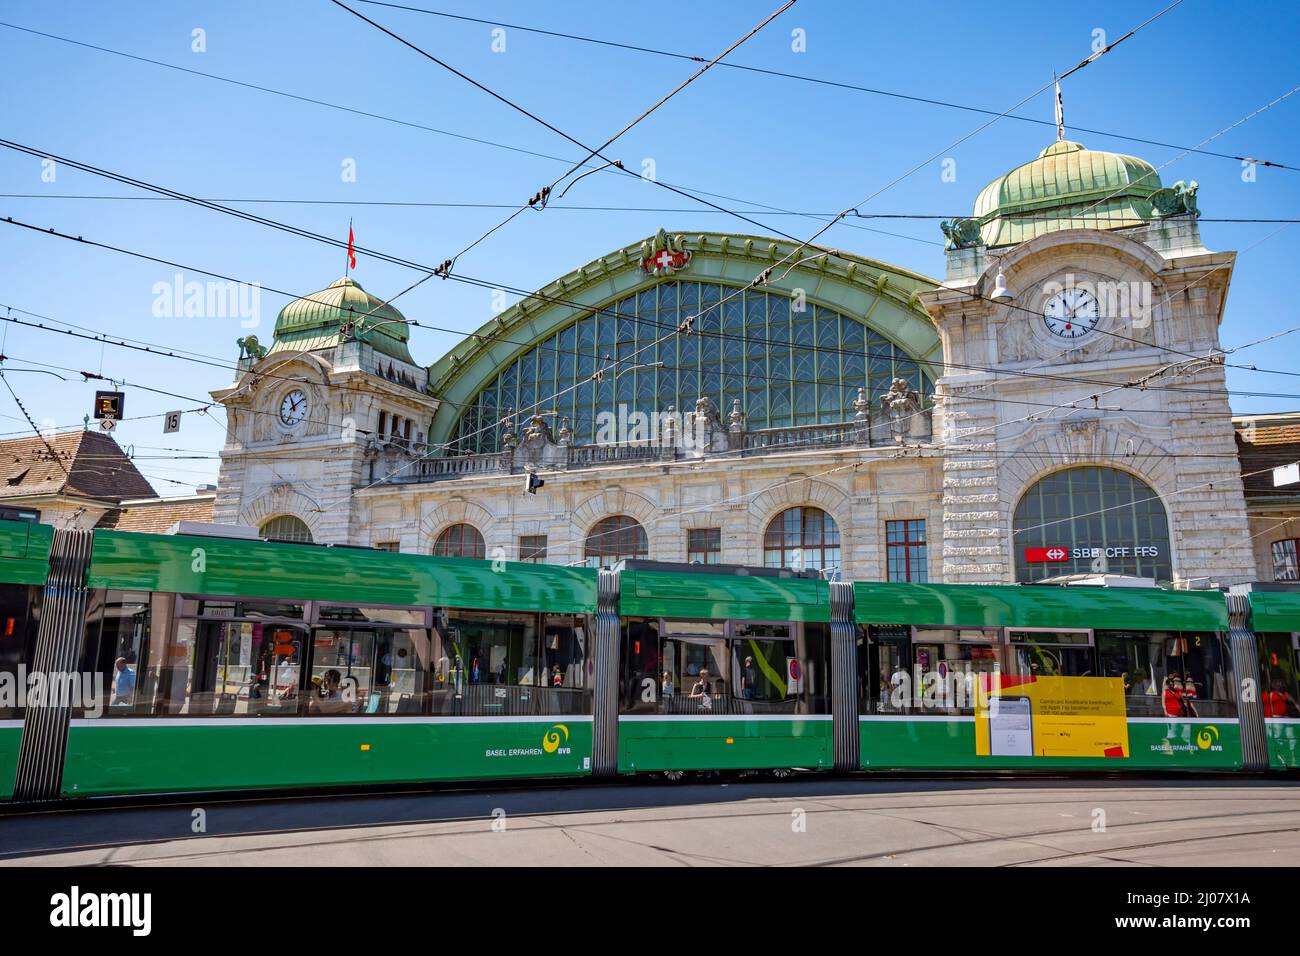 Railroad Station and Tram in a Sunny Day in Basel, Switzerland. *** Local Caption ***  tram,tramway,entrance,railroad,station,train,transportation,hol Stock Photo